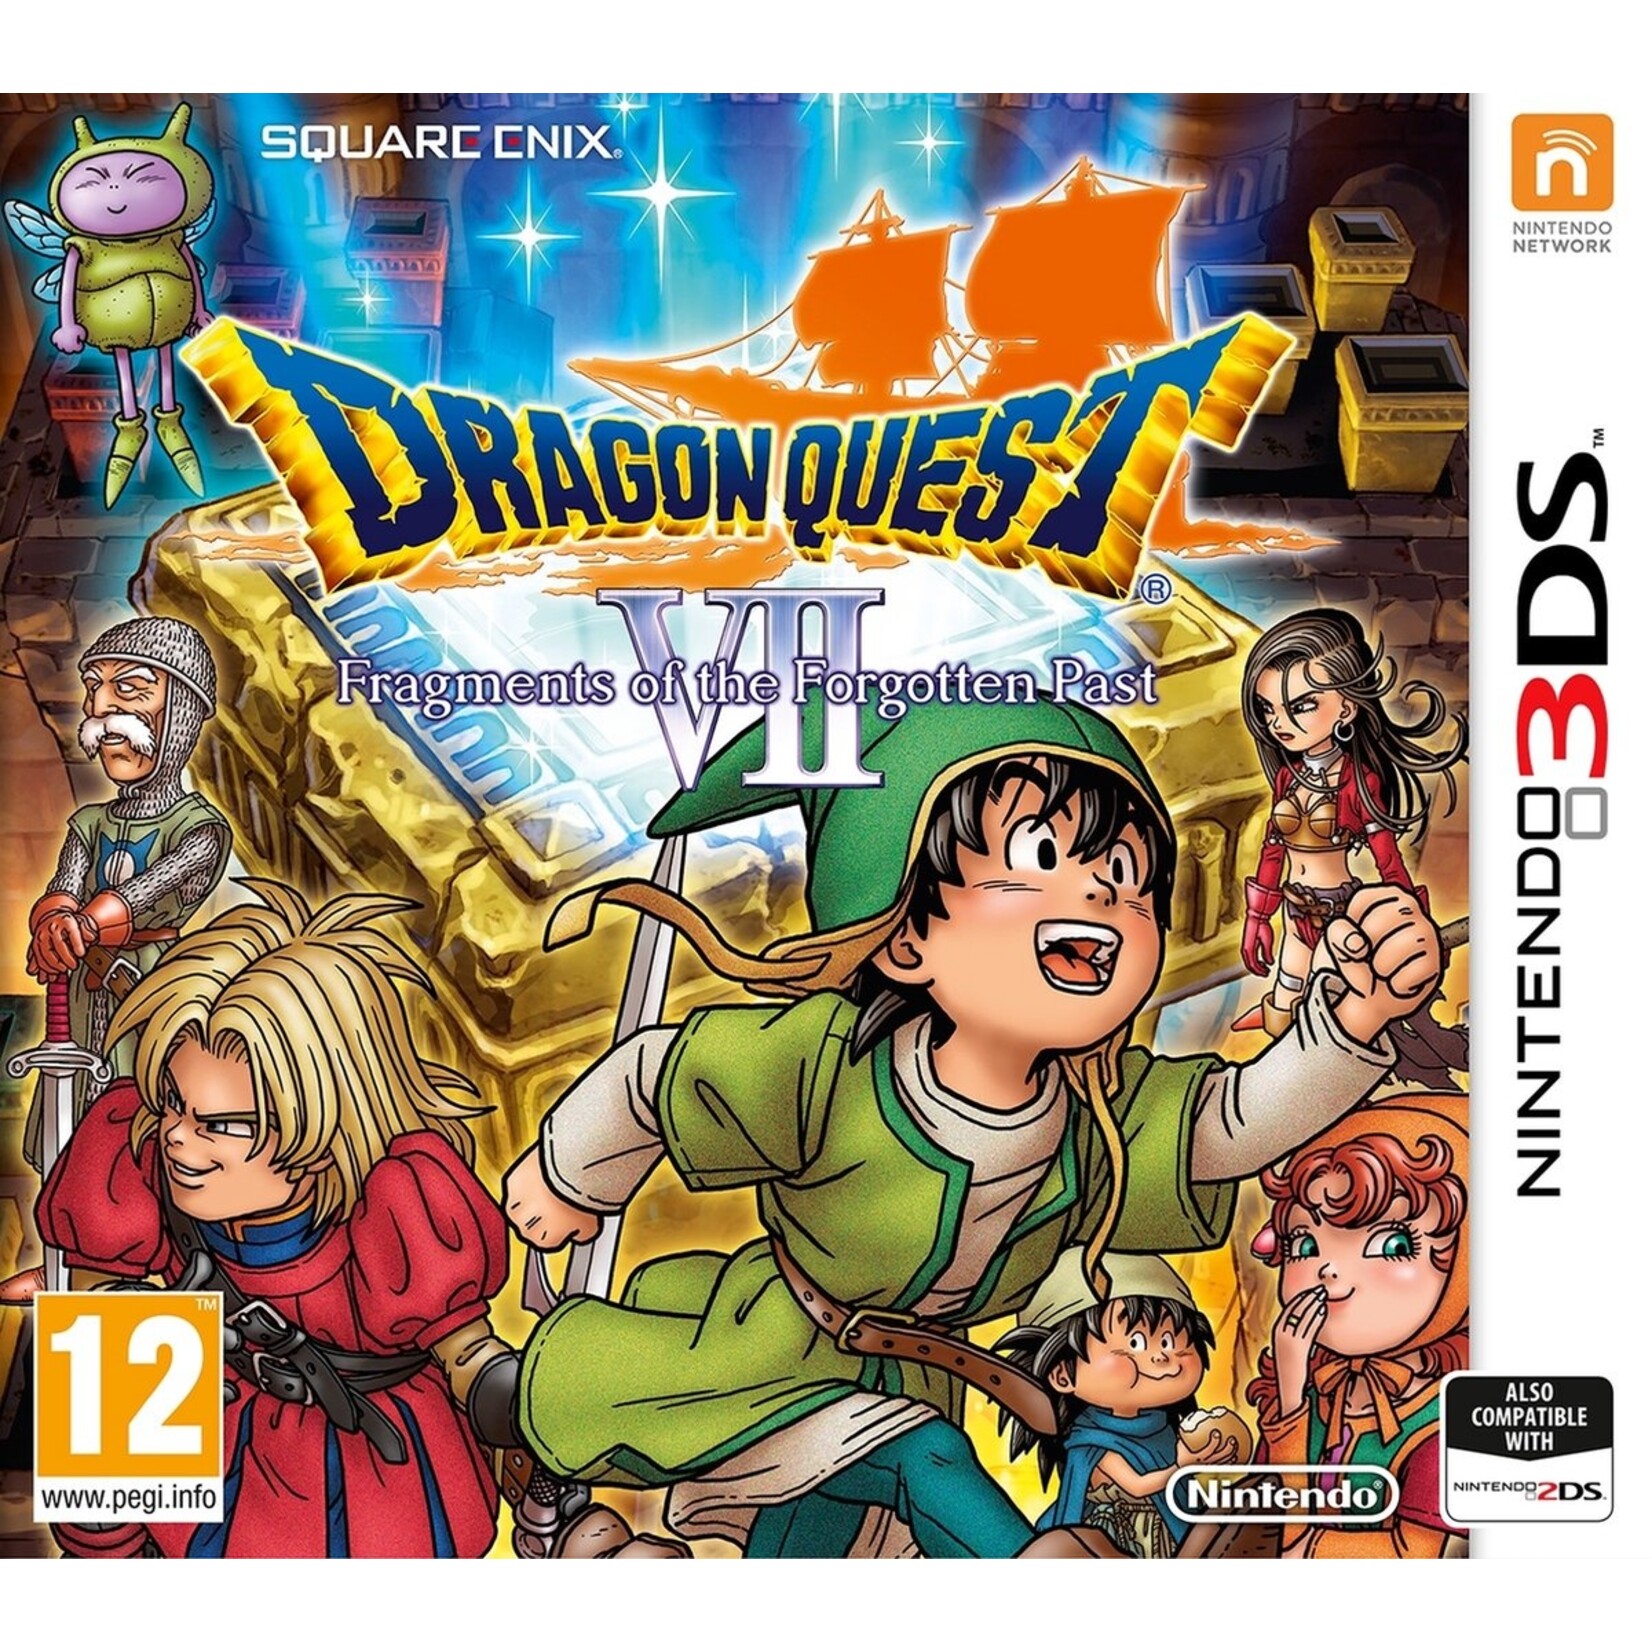 Dragon quest vii fragments of the forgotten past